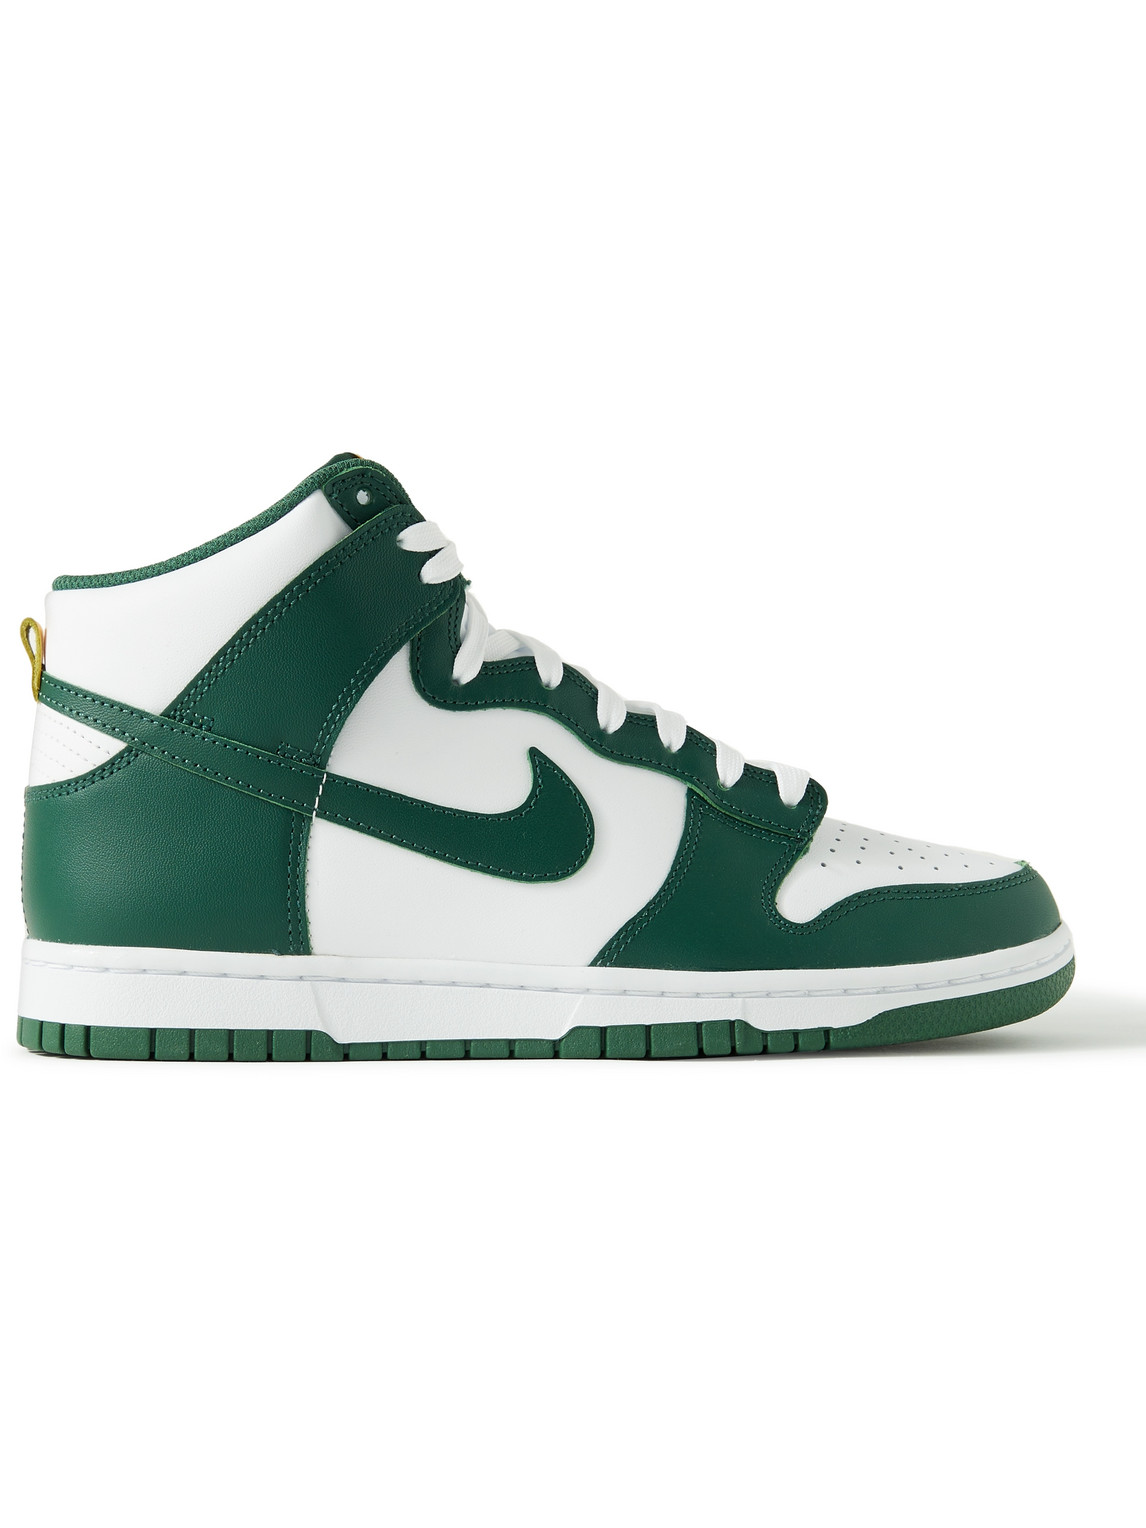 NIKE DUNK HIGH RETRO LEATHER HIGH-TOP SNEAKERS